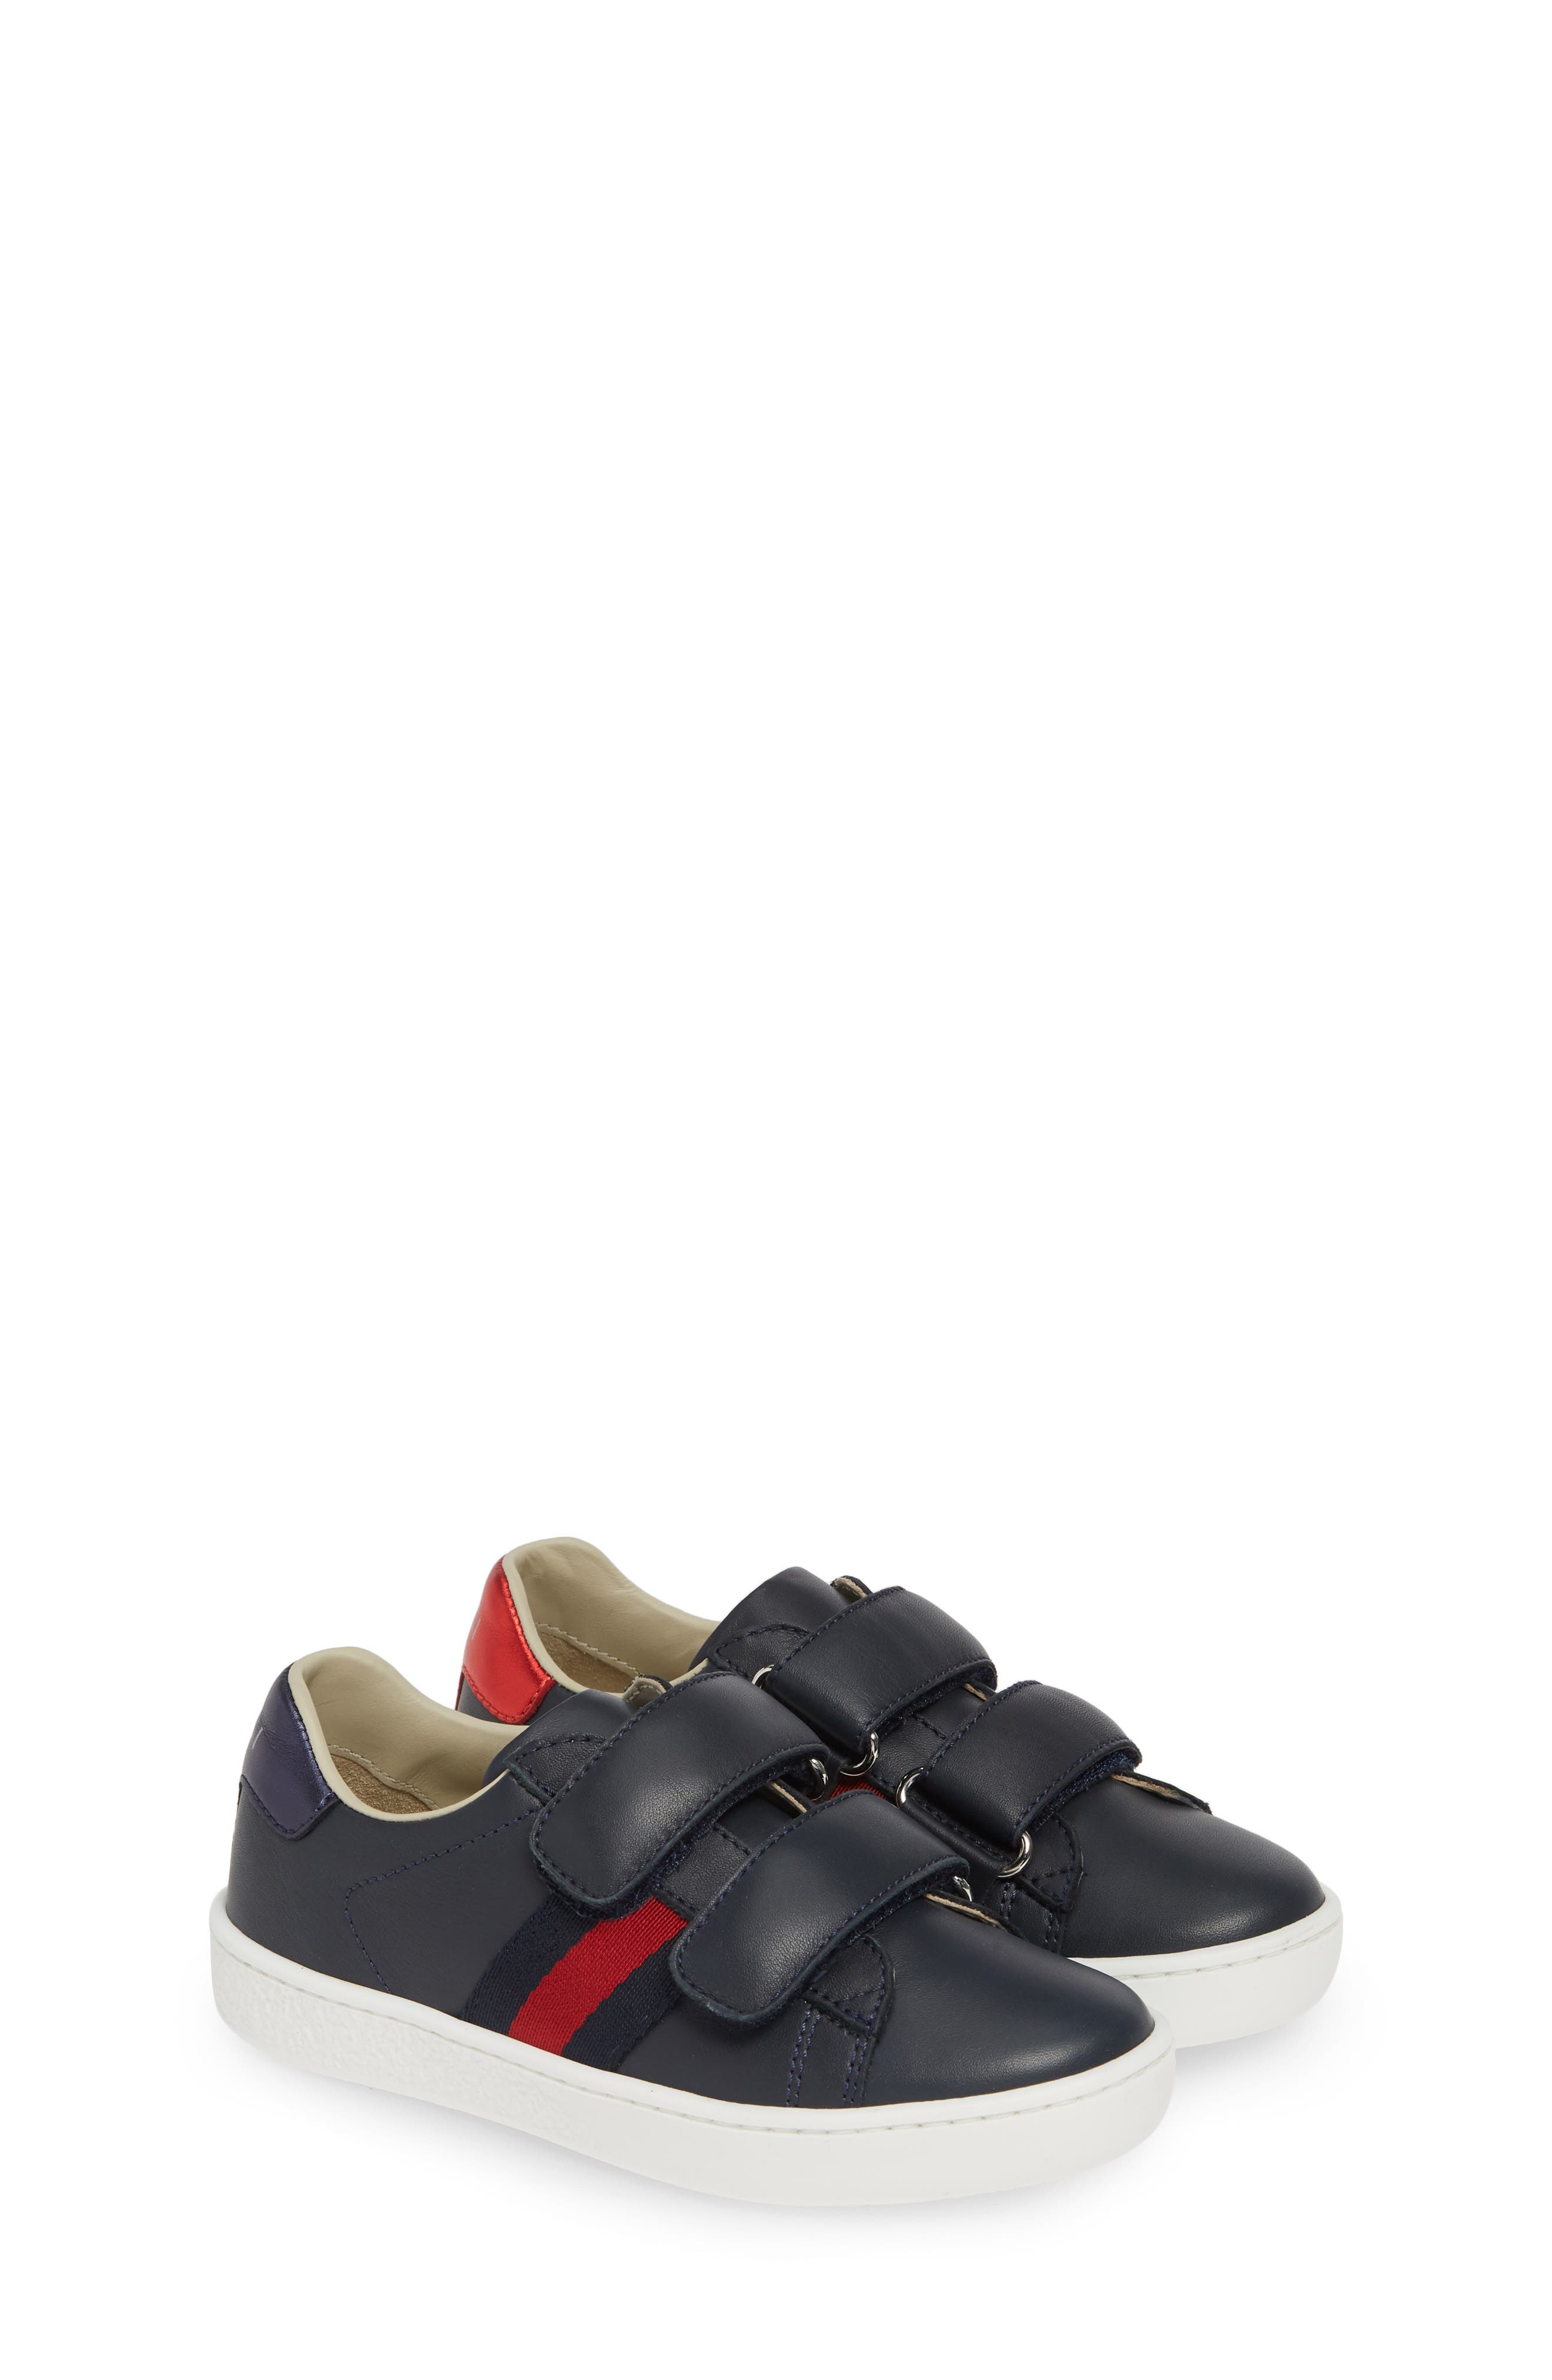 Gucci Shoes for Babies | Nordstrom